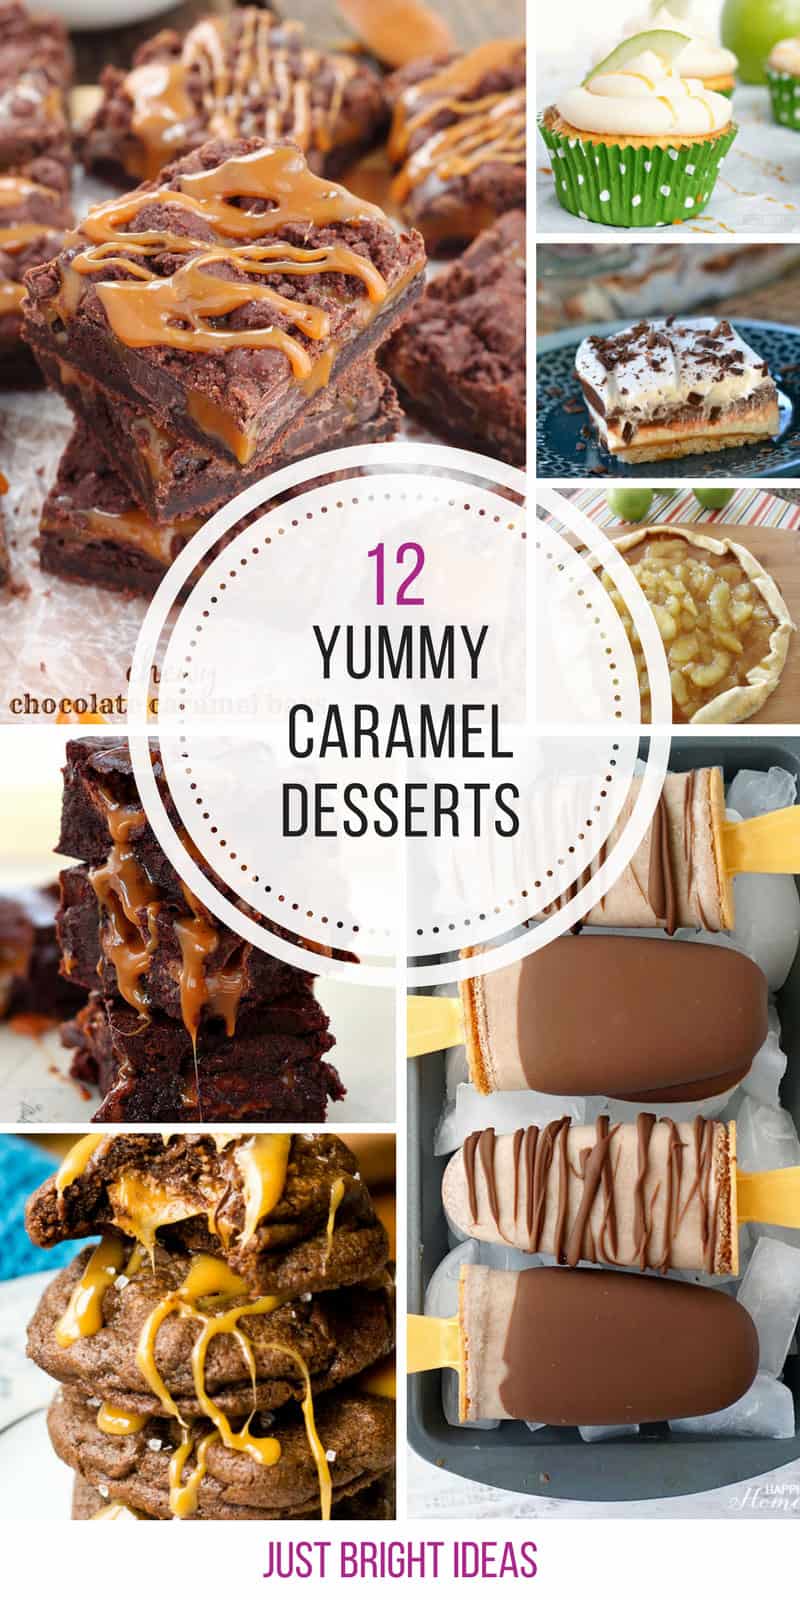 Caramel desserts you say? The diet can start tomorrow!